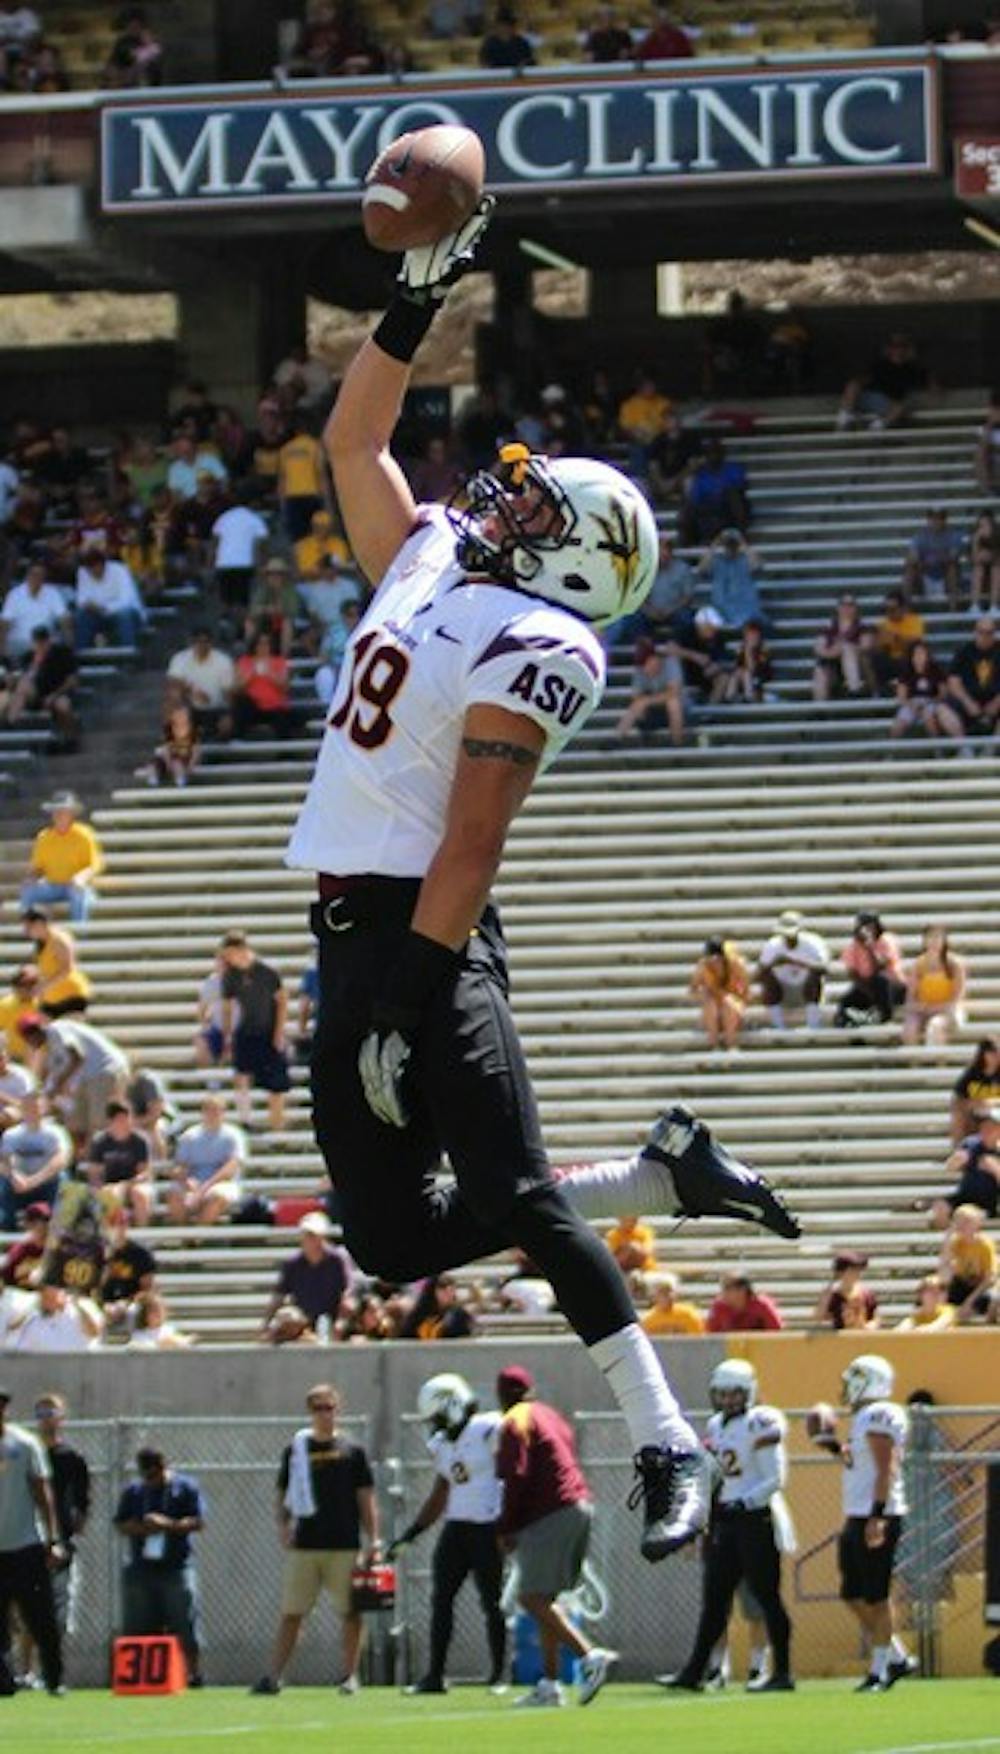 Senior defensive back Jordan Simone leaps for a catch in warmups during the Sun Devils' Fan Fest on April 13. ASU coach Todd Graham was impressed with the defense during the spring game. (Photo by Dominic Valente.)
